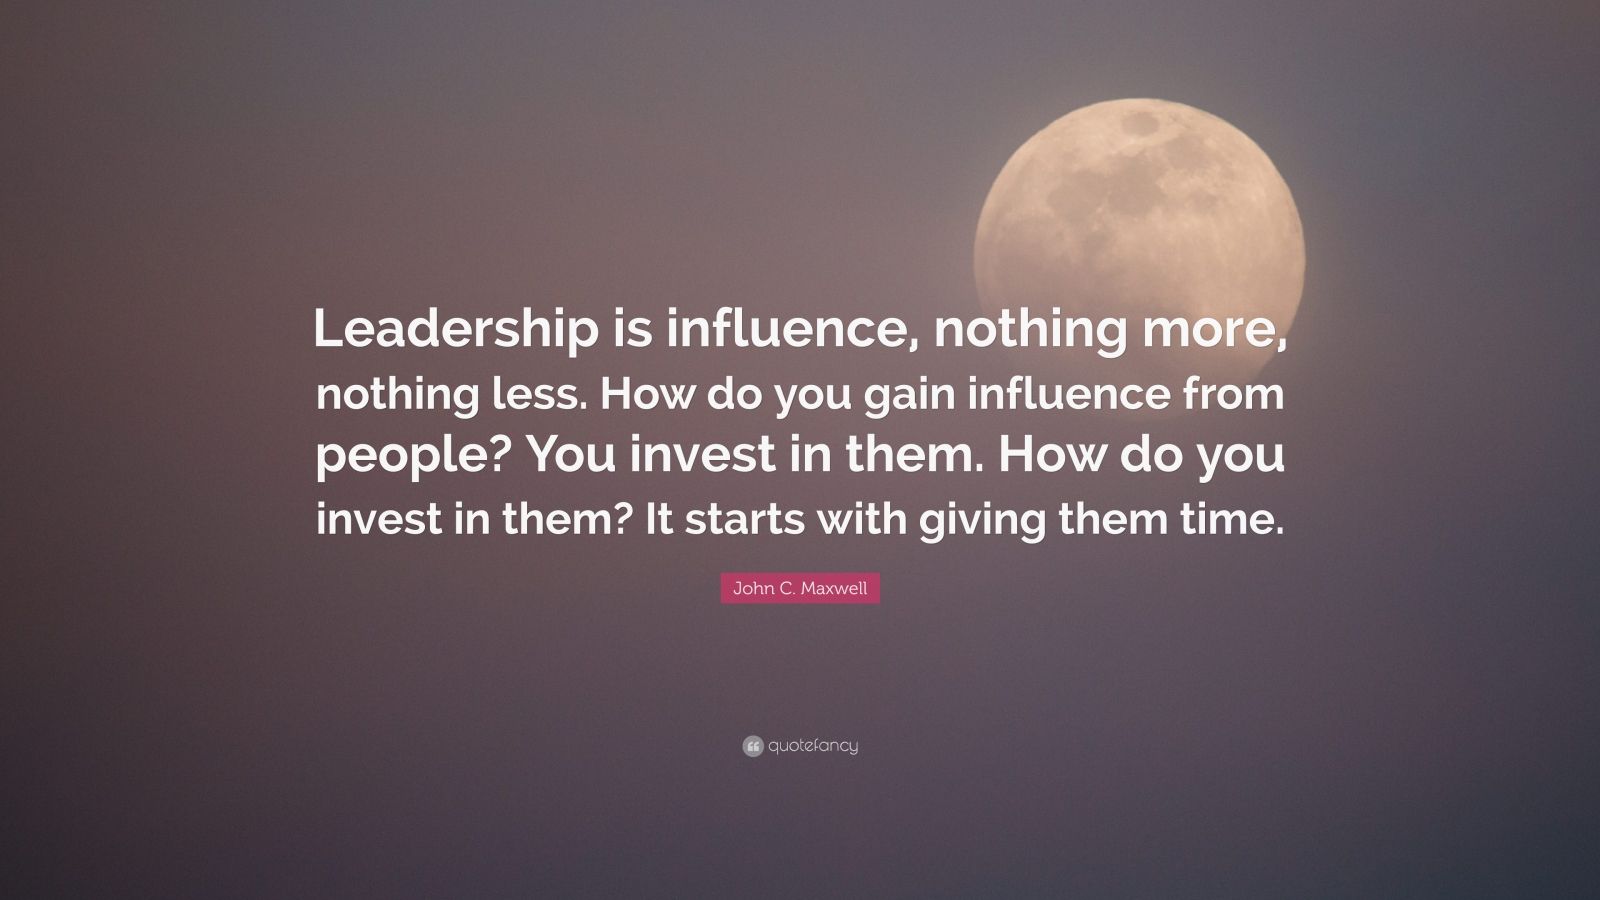 4812498 John C Maxwell Quote Leadership is influence nothing more nothing